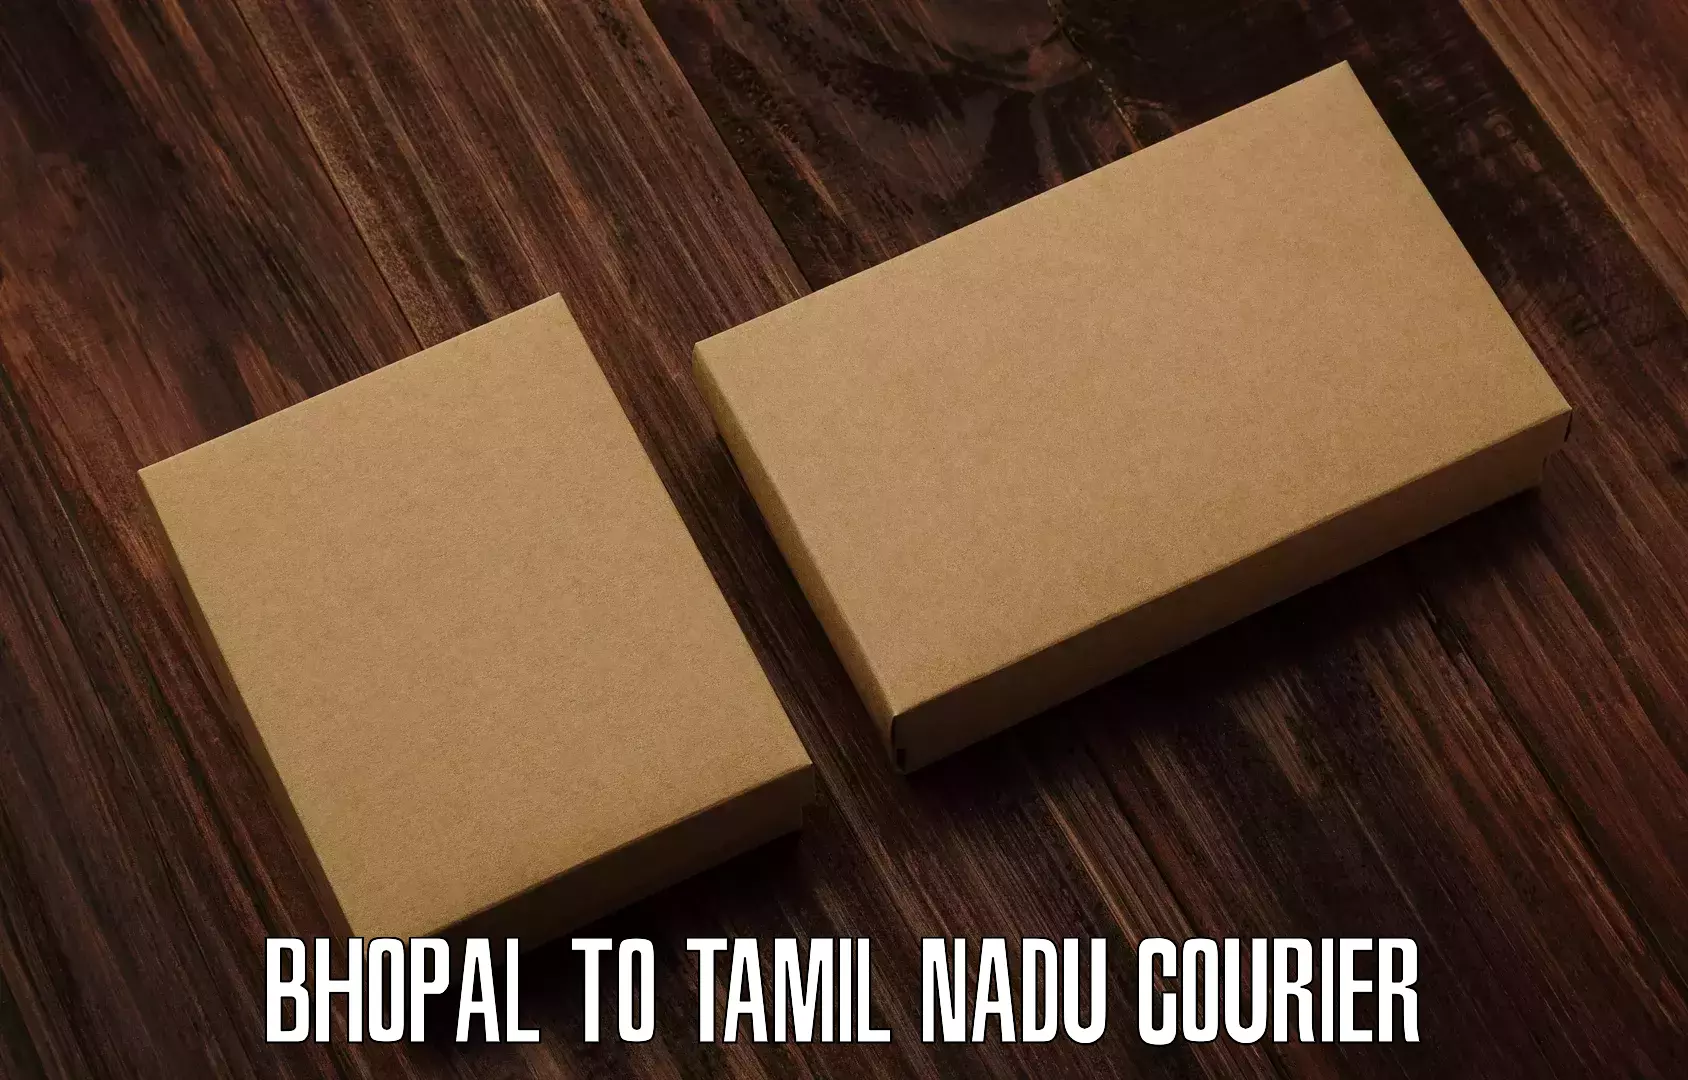 Trackable shipping service Bhopal to Palayankottai